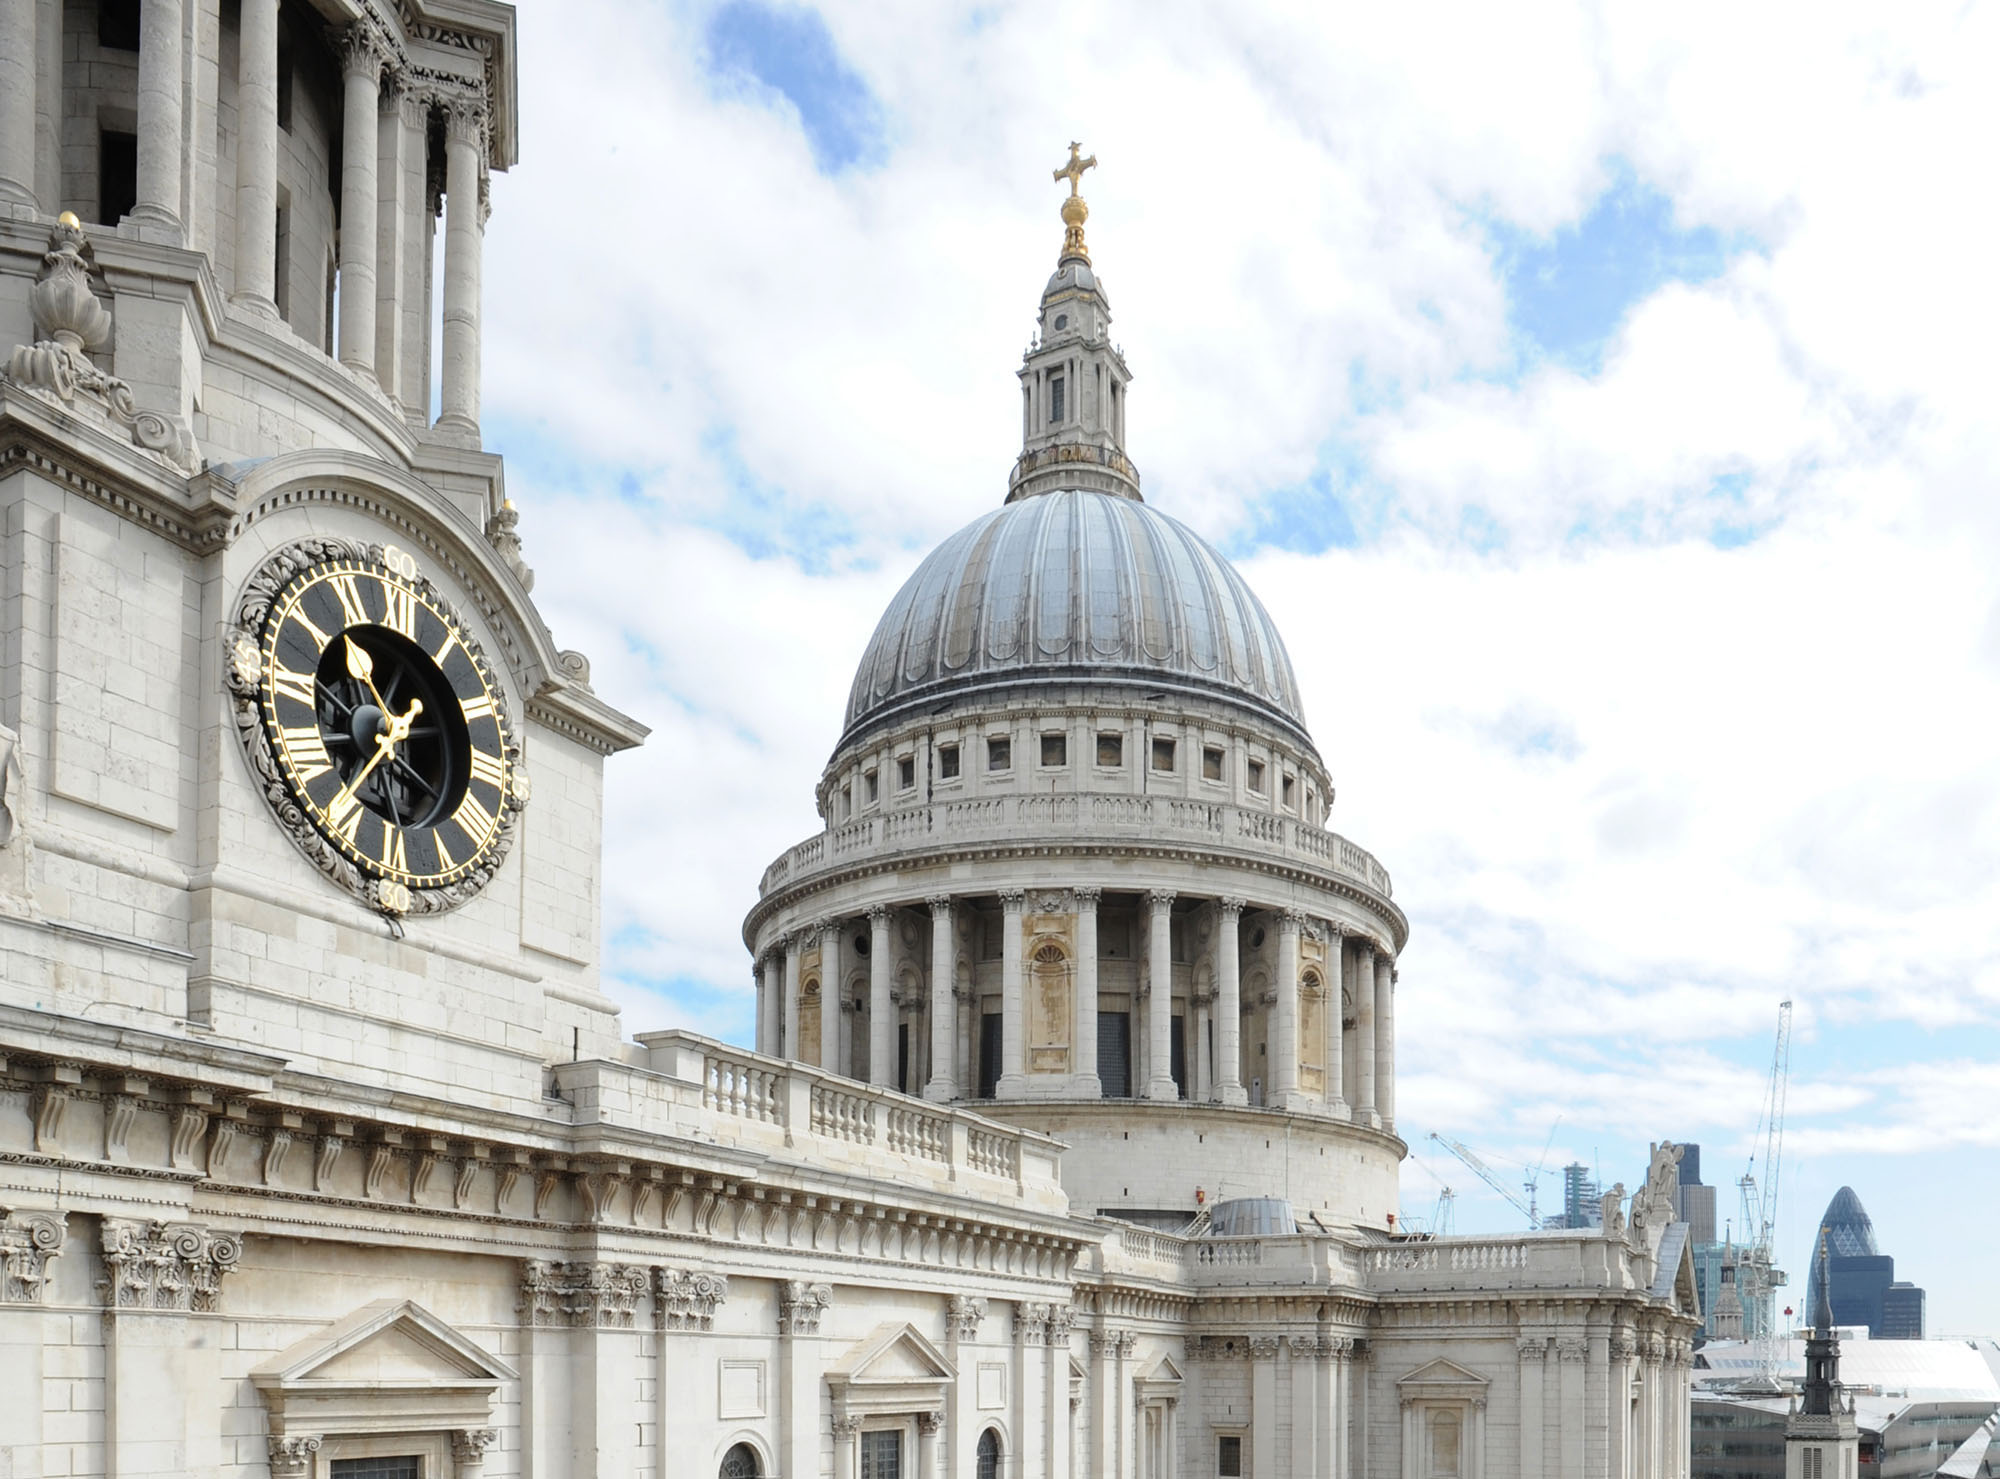 Dome of St Paul's Cathedral from the south with clock in foreground